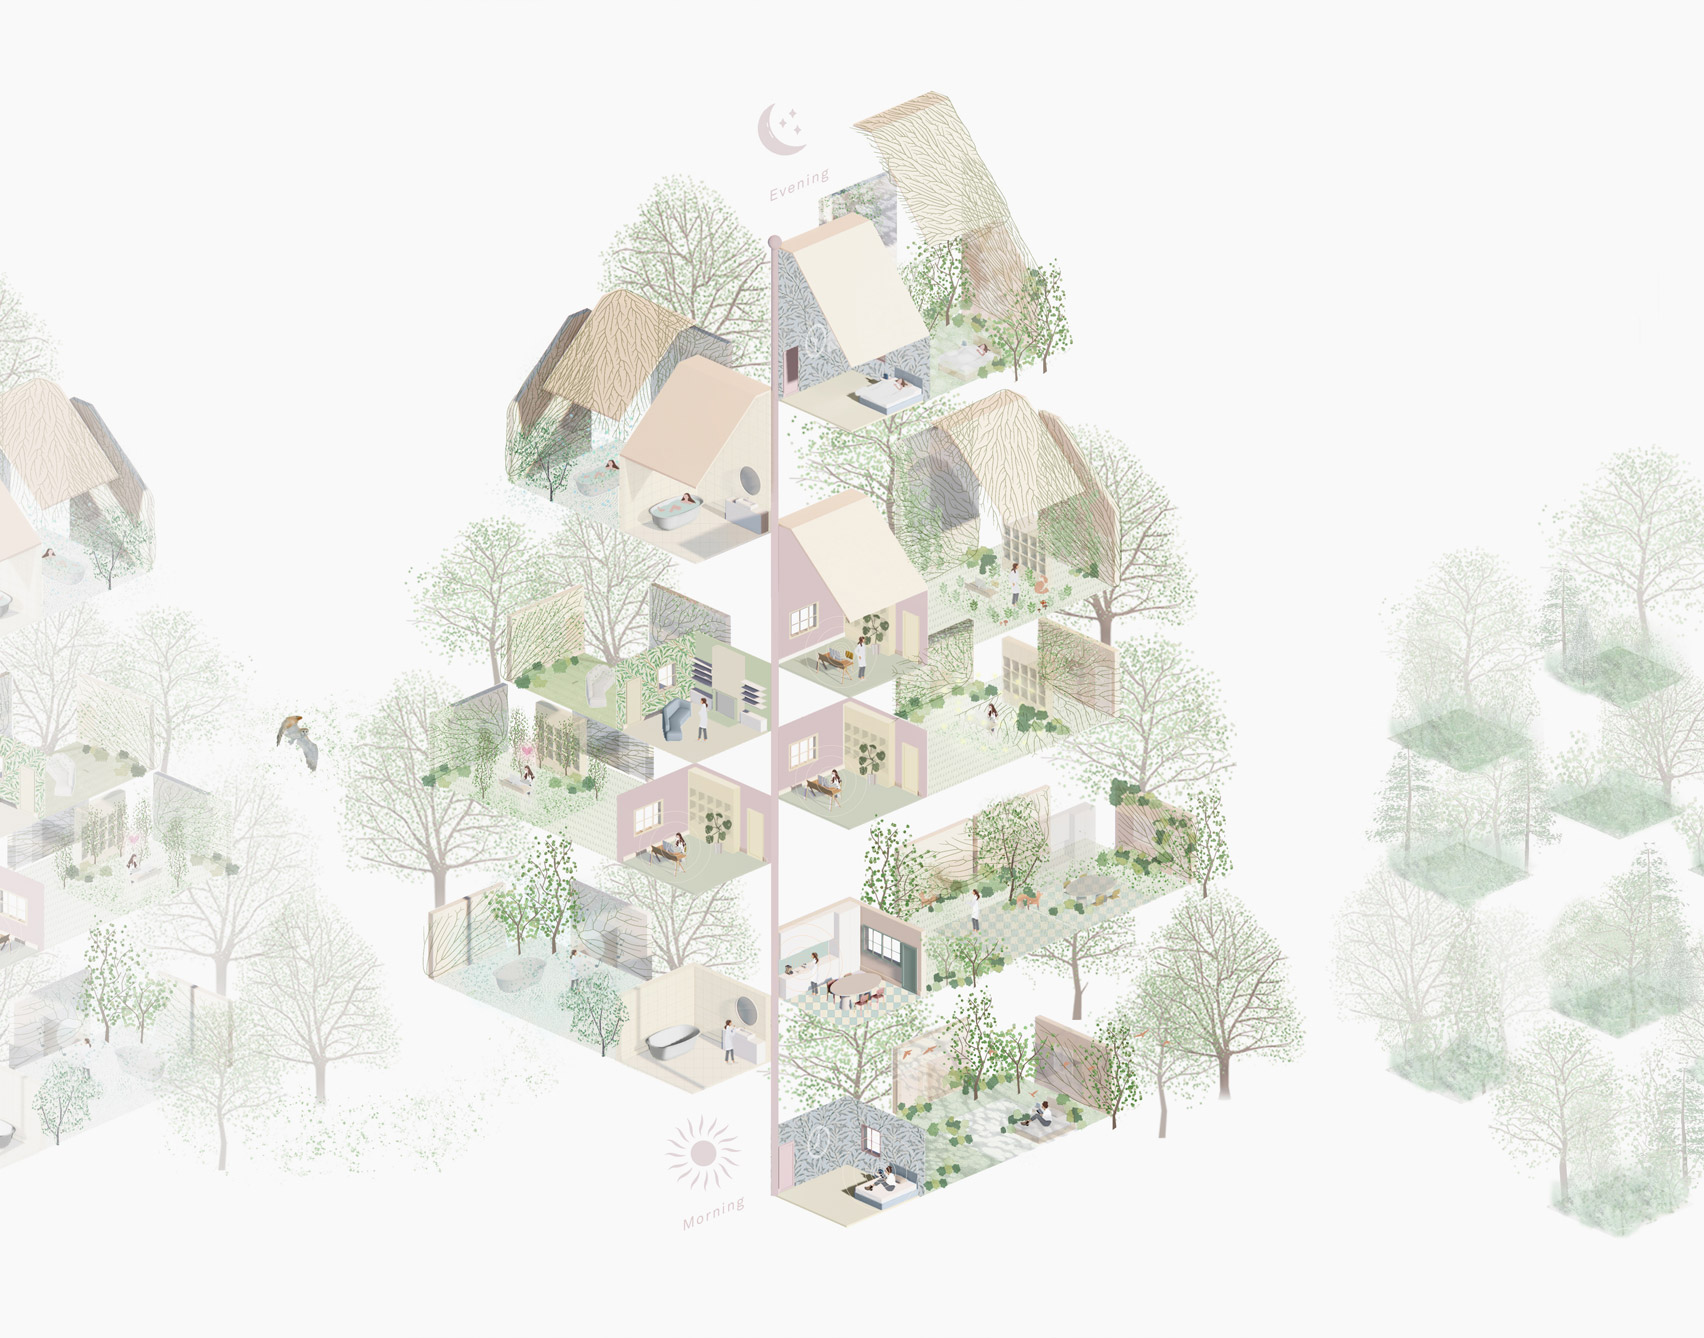 An illustration of the HomeForest concept